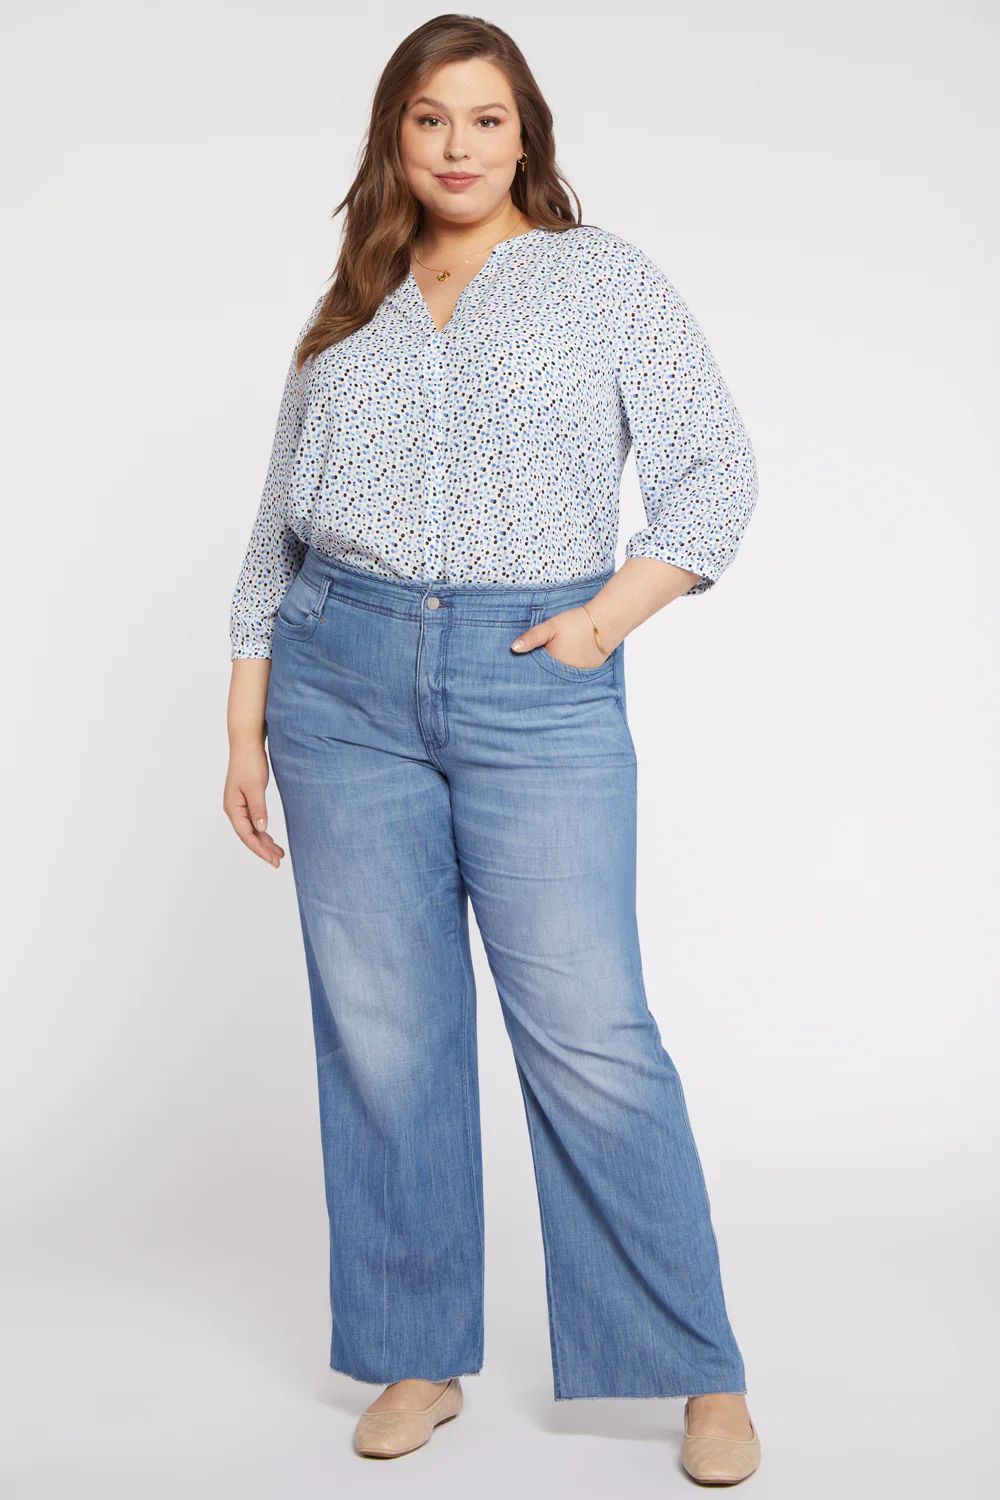 Teresa Wide Leg Jeans In Plus Size
With High Rise And Raw Hems
Color: Everly | NYDJ